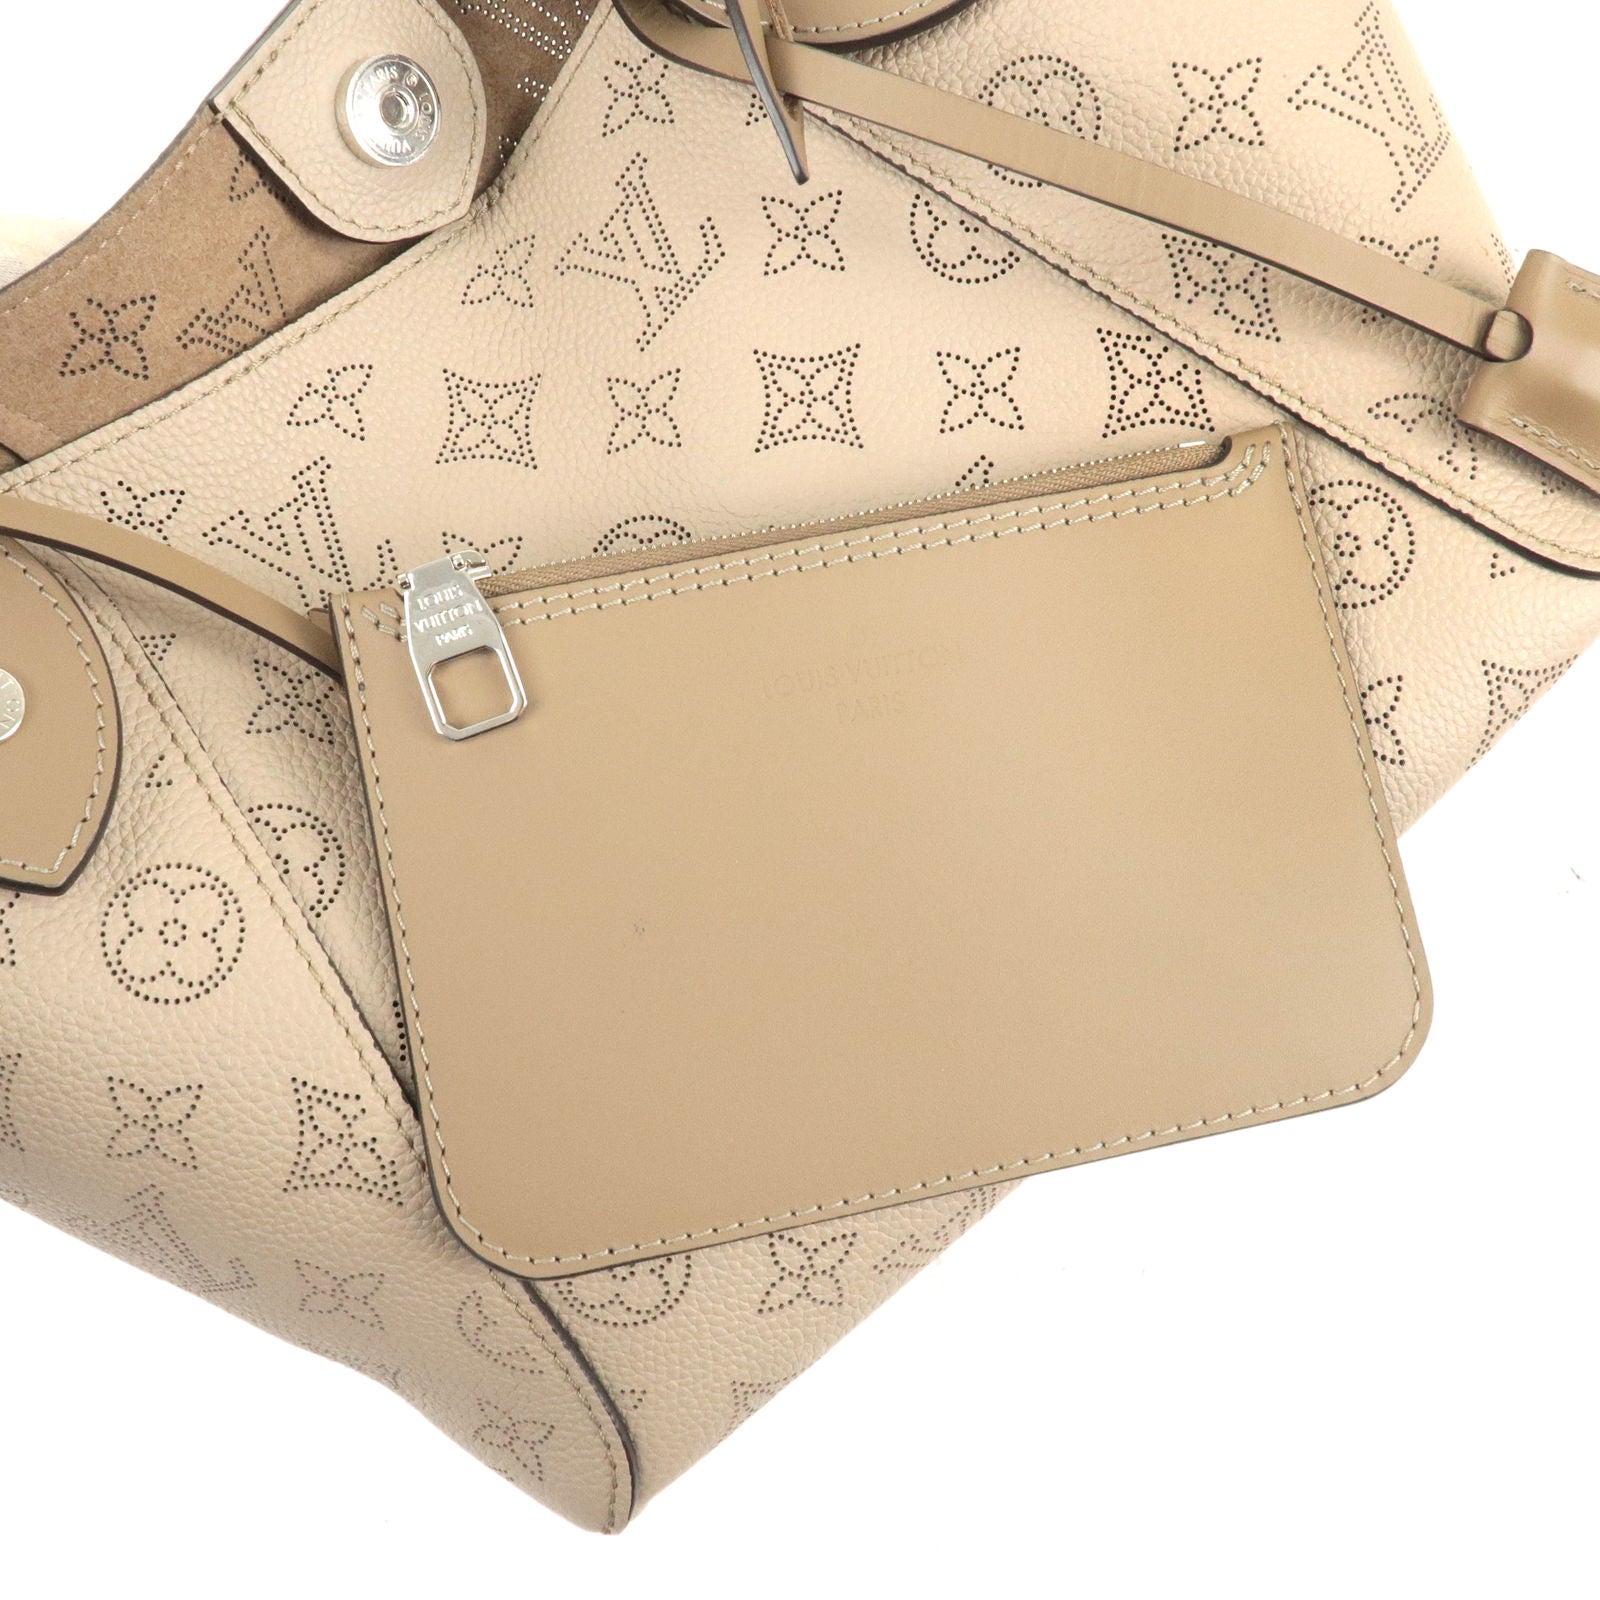 Hina PM Mahina Leather in Women's Handbags collections by Louis Vuitton